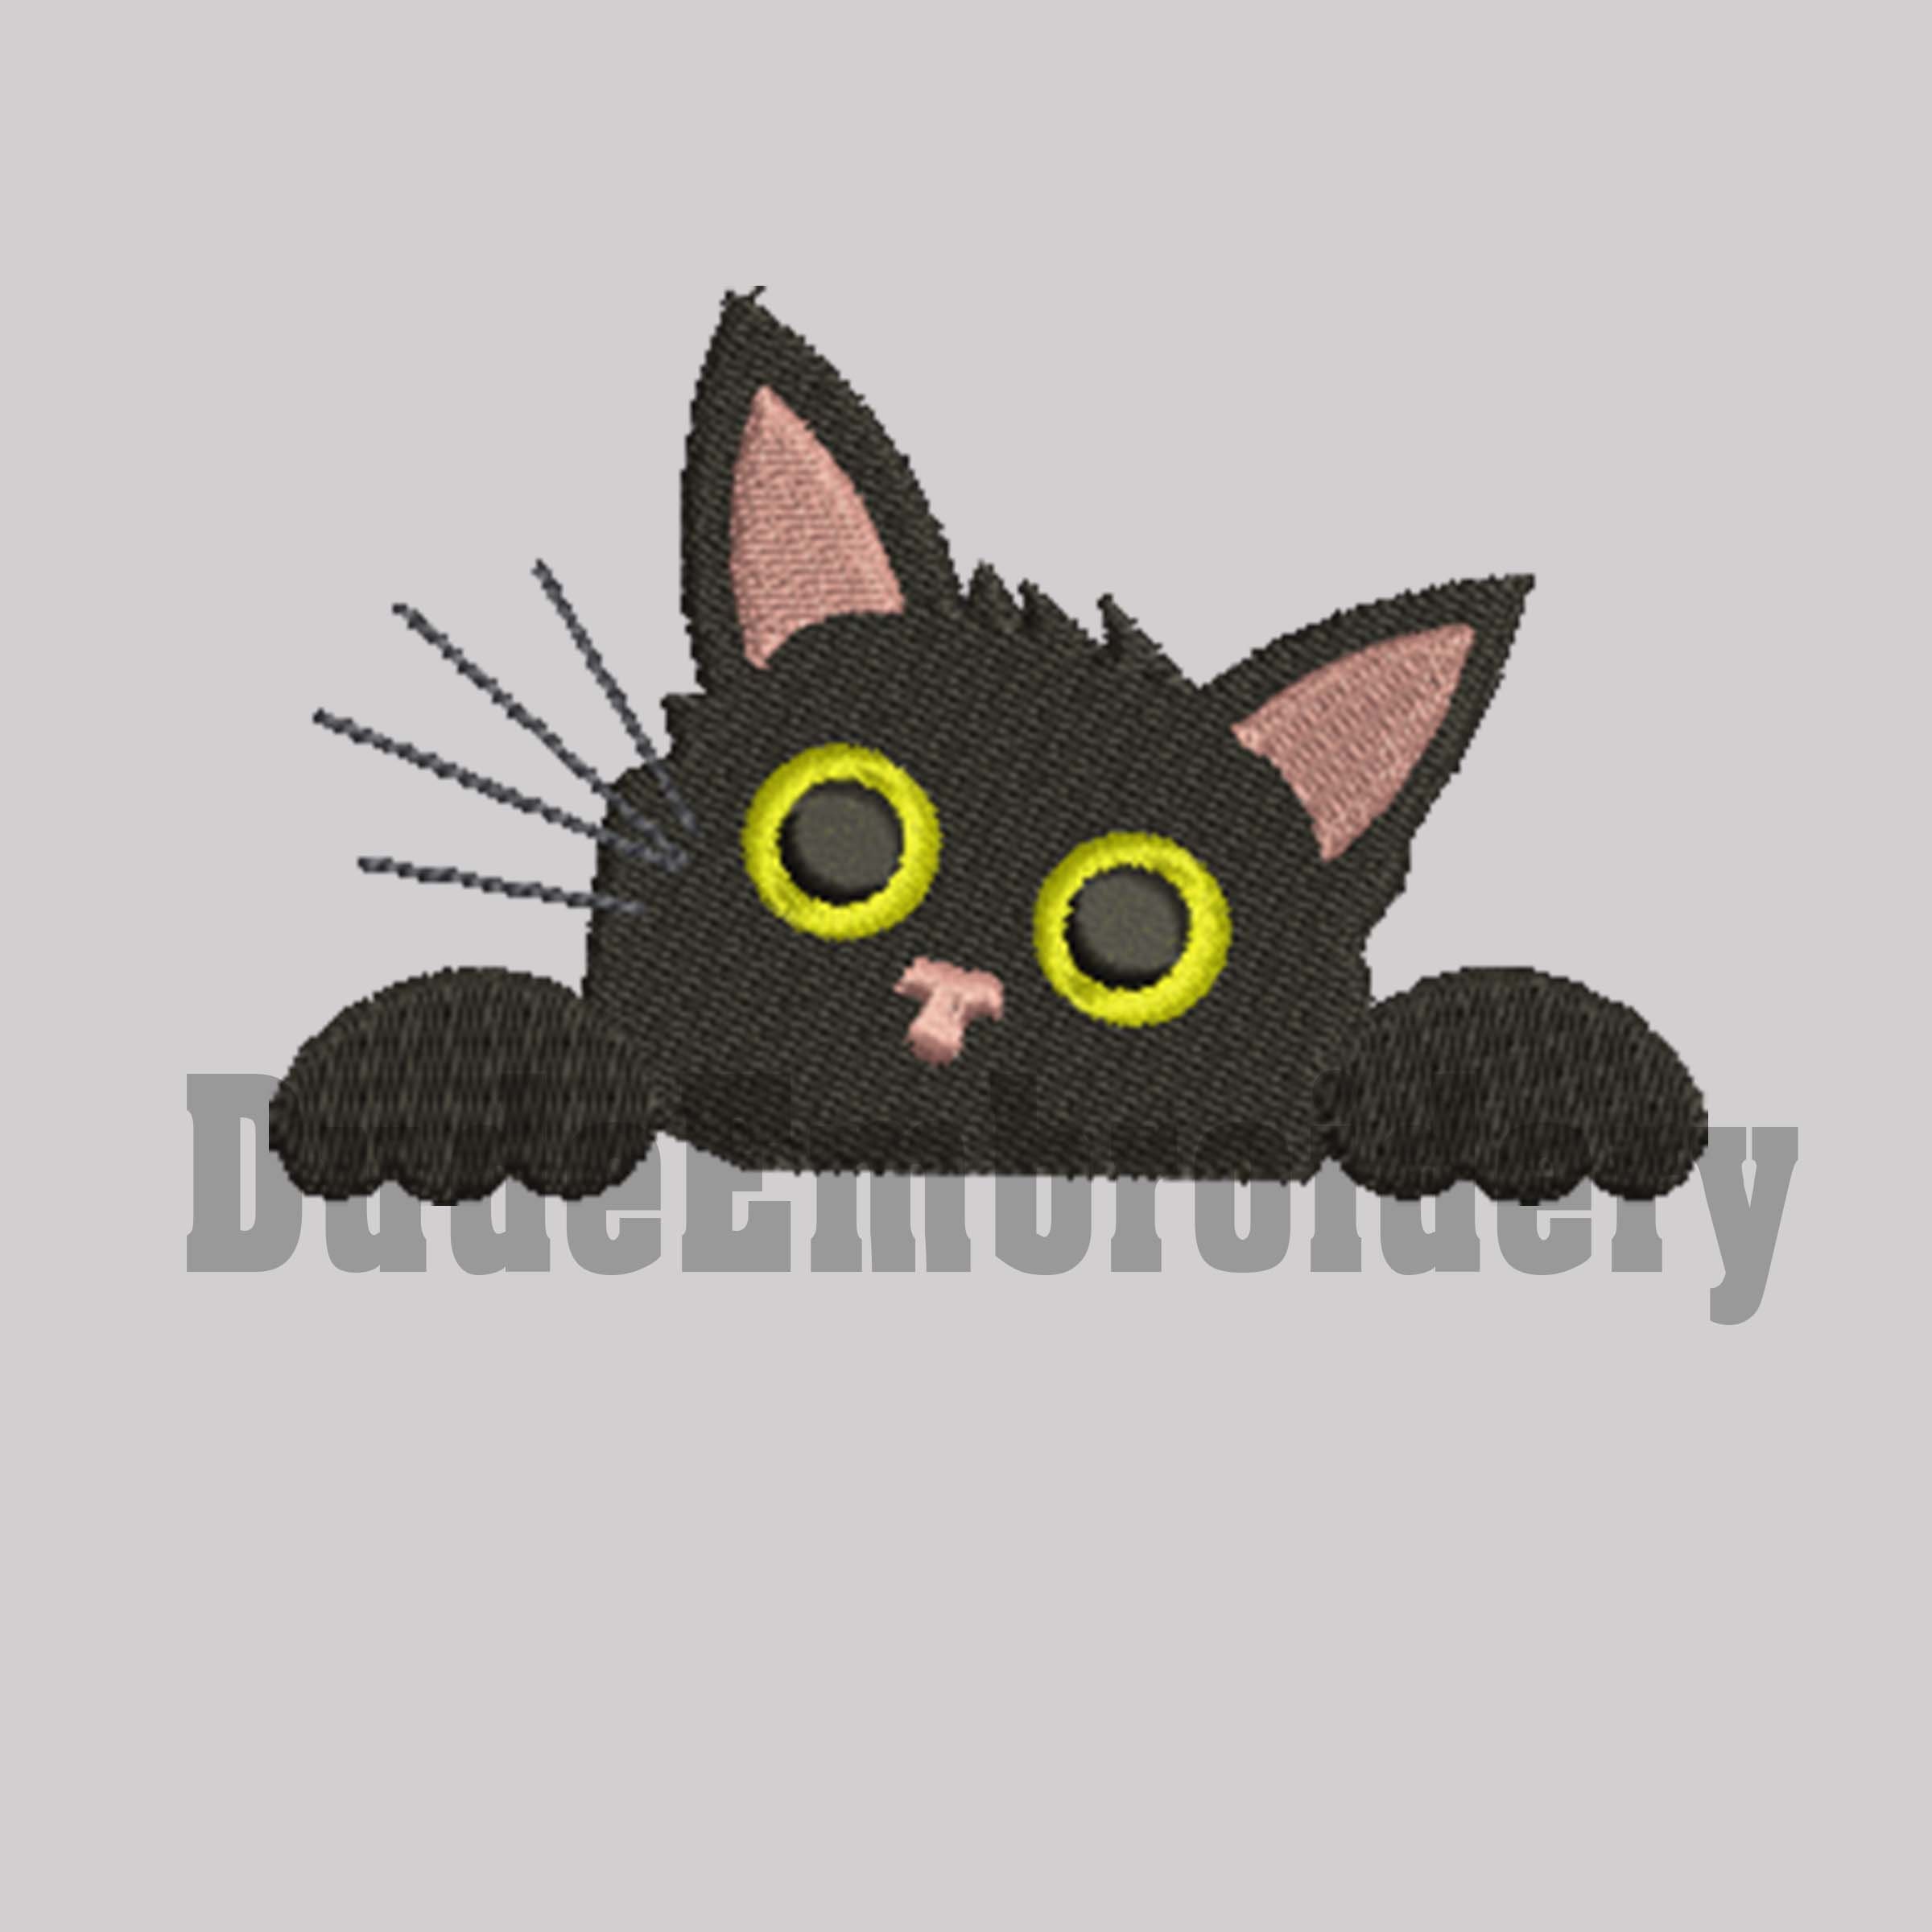 Cute Black Cat Embroidery Kit Cross Stitch Kits For - Temu Italy